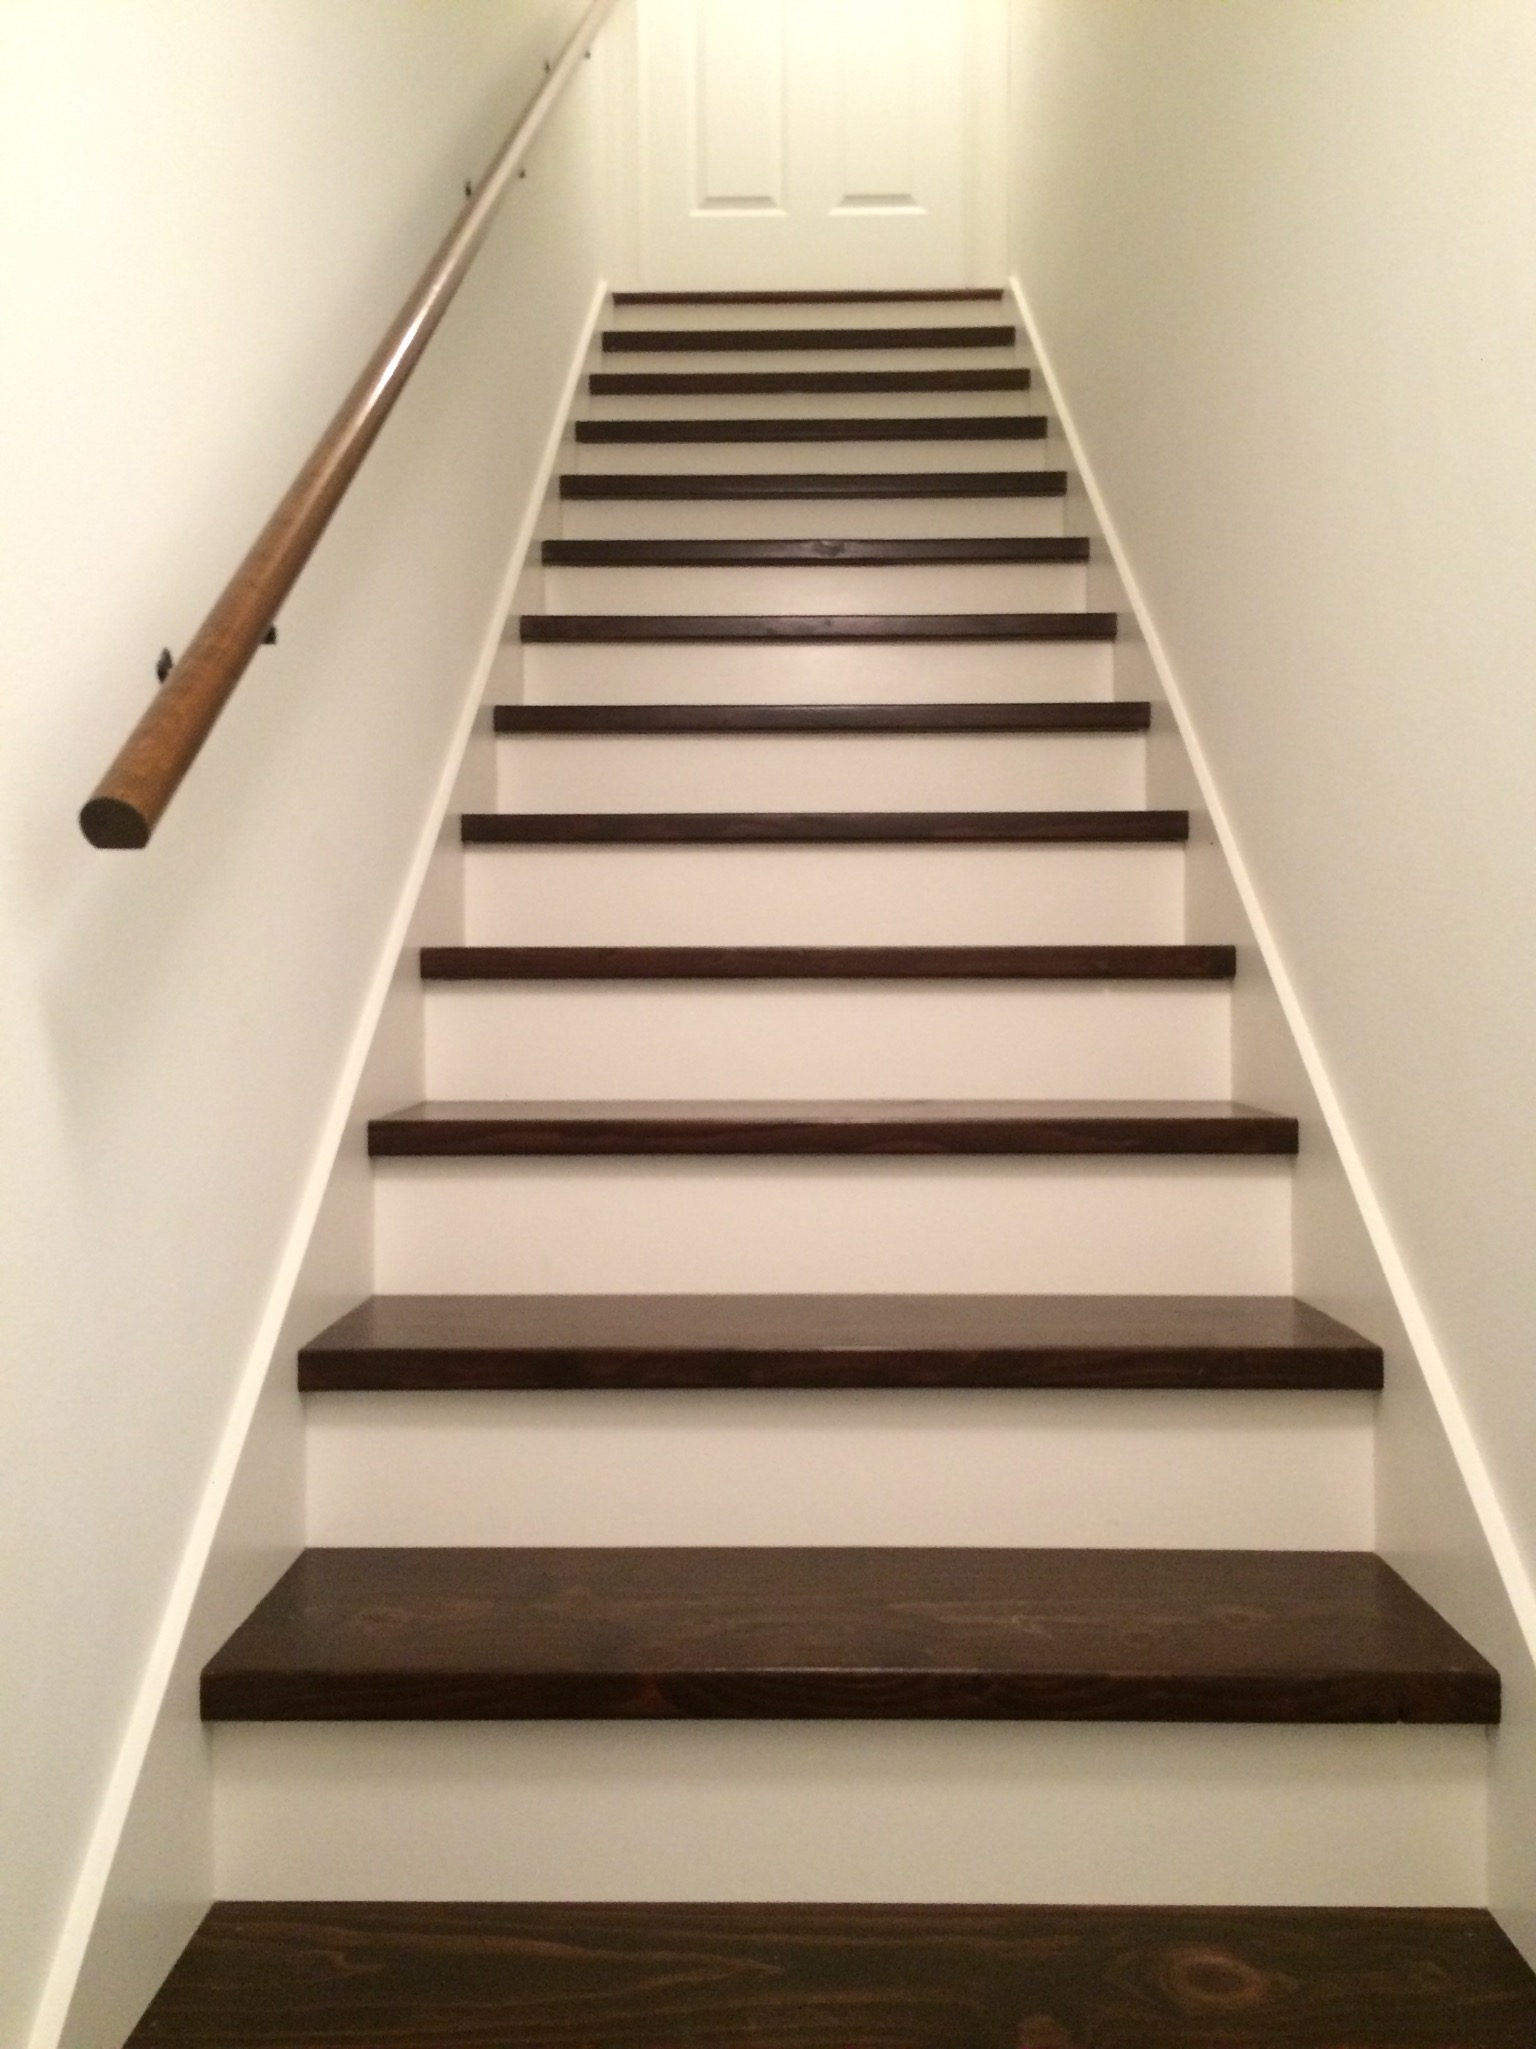 Painted Stairs Transformation | Our Country Home